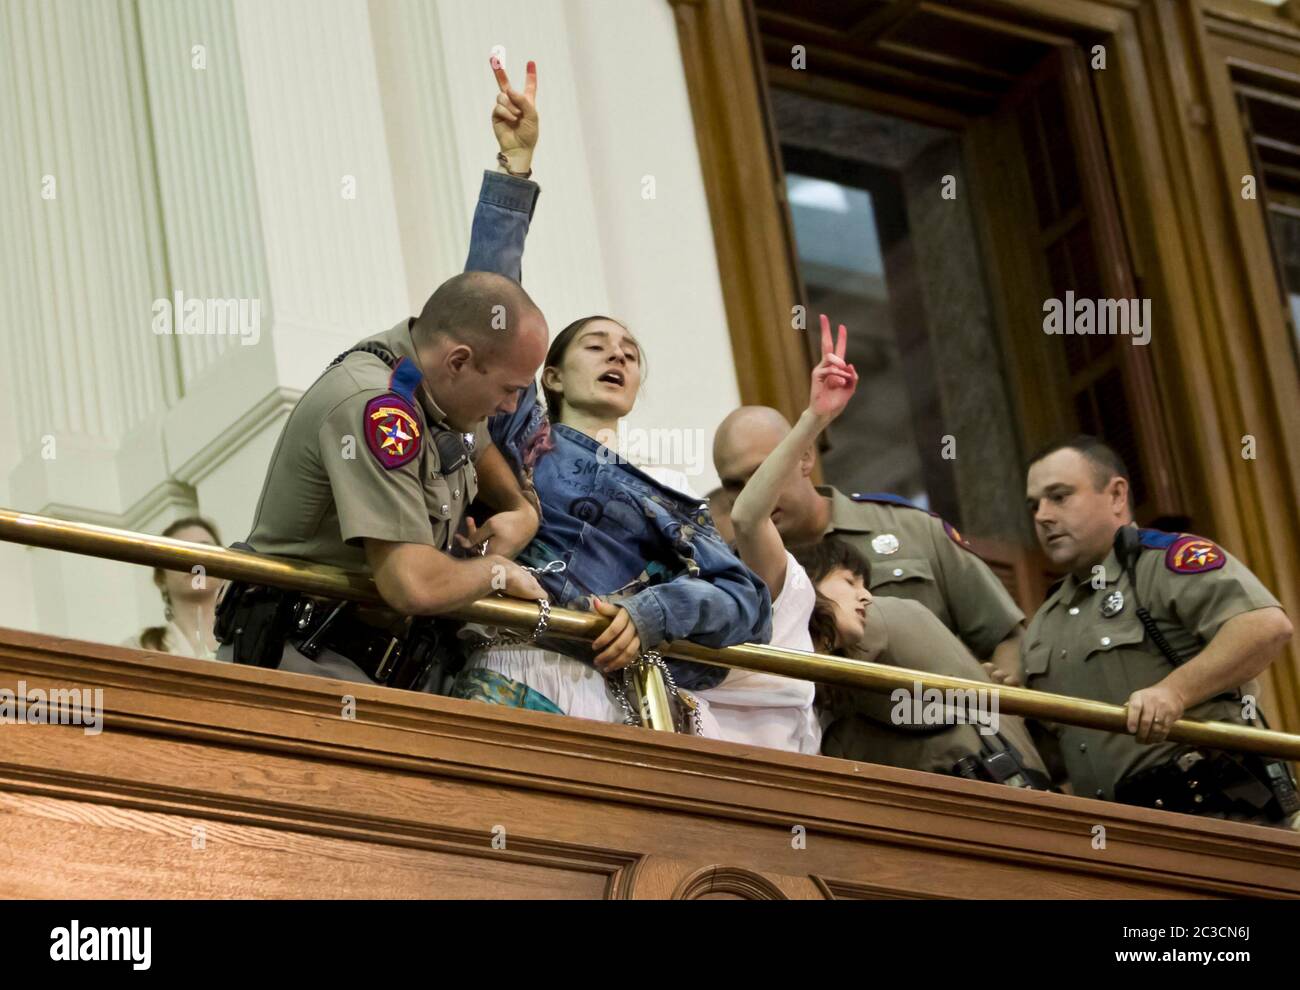 July 11, 2013, Austin, Texas USA: Texas Department of Public Safety officers remove two young women from the gallery of the Texas Senate as they shouted their opposition to proposed controversial legislation restricting access to abortion.  ©Marjorie Kamys Cotera/Daemmrich Photography Stock Photo